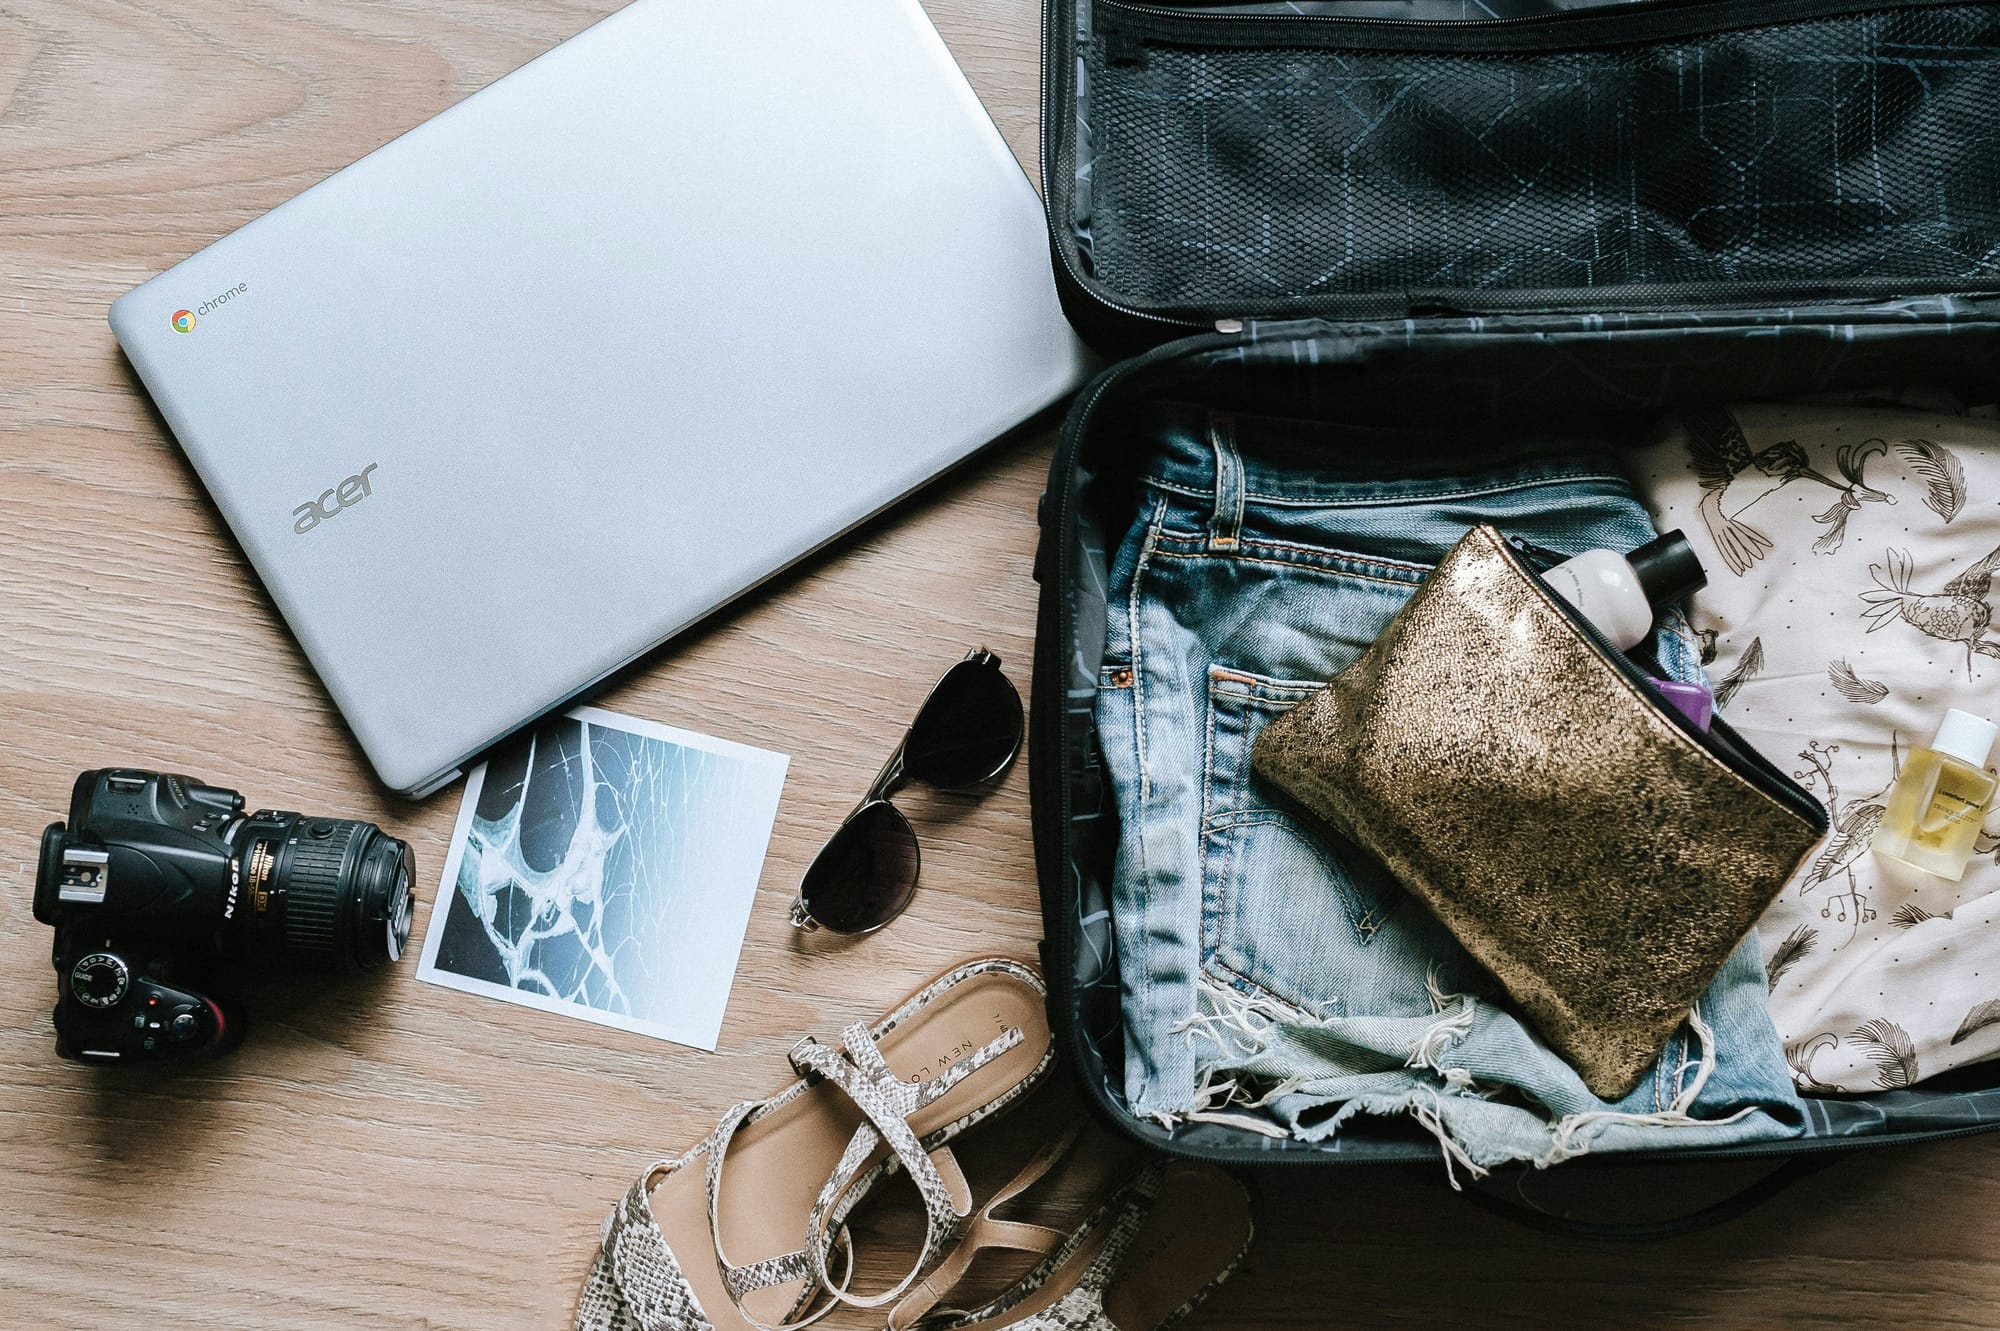 The 10 Most Forgotten Items to Pack When Leaving on a Trip